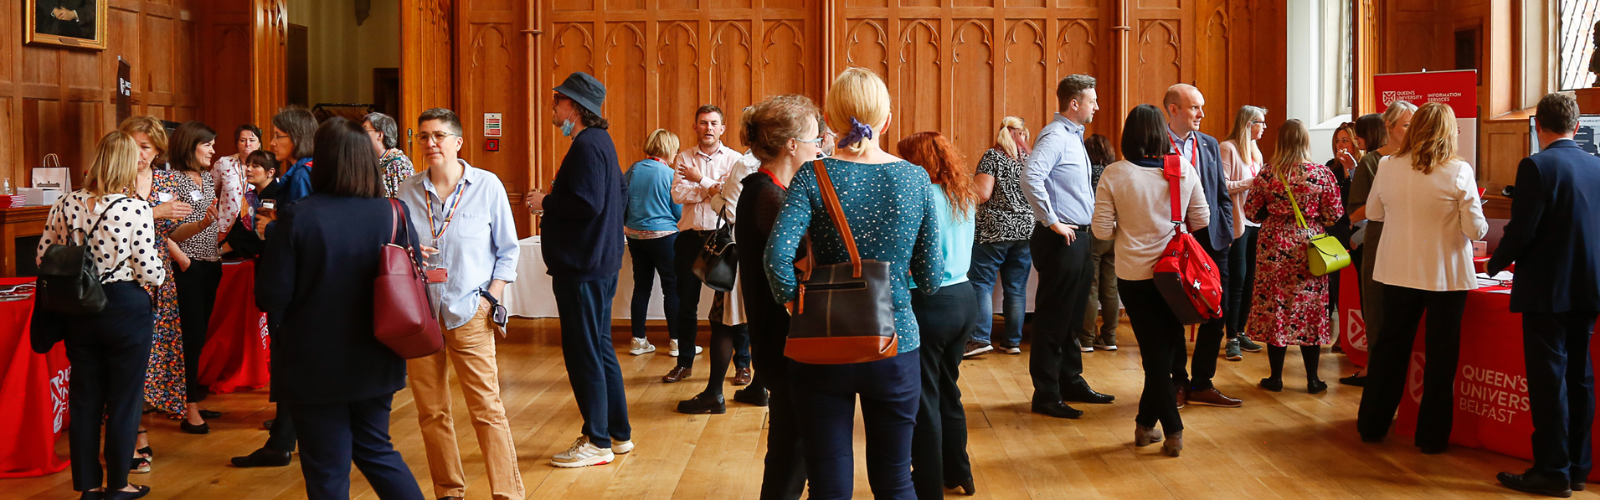 Image shows staff gathered at an event in the Great Hall.